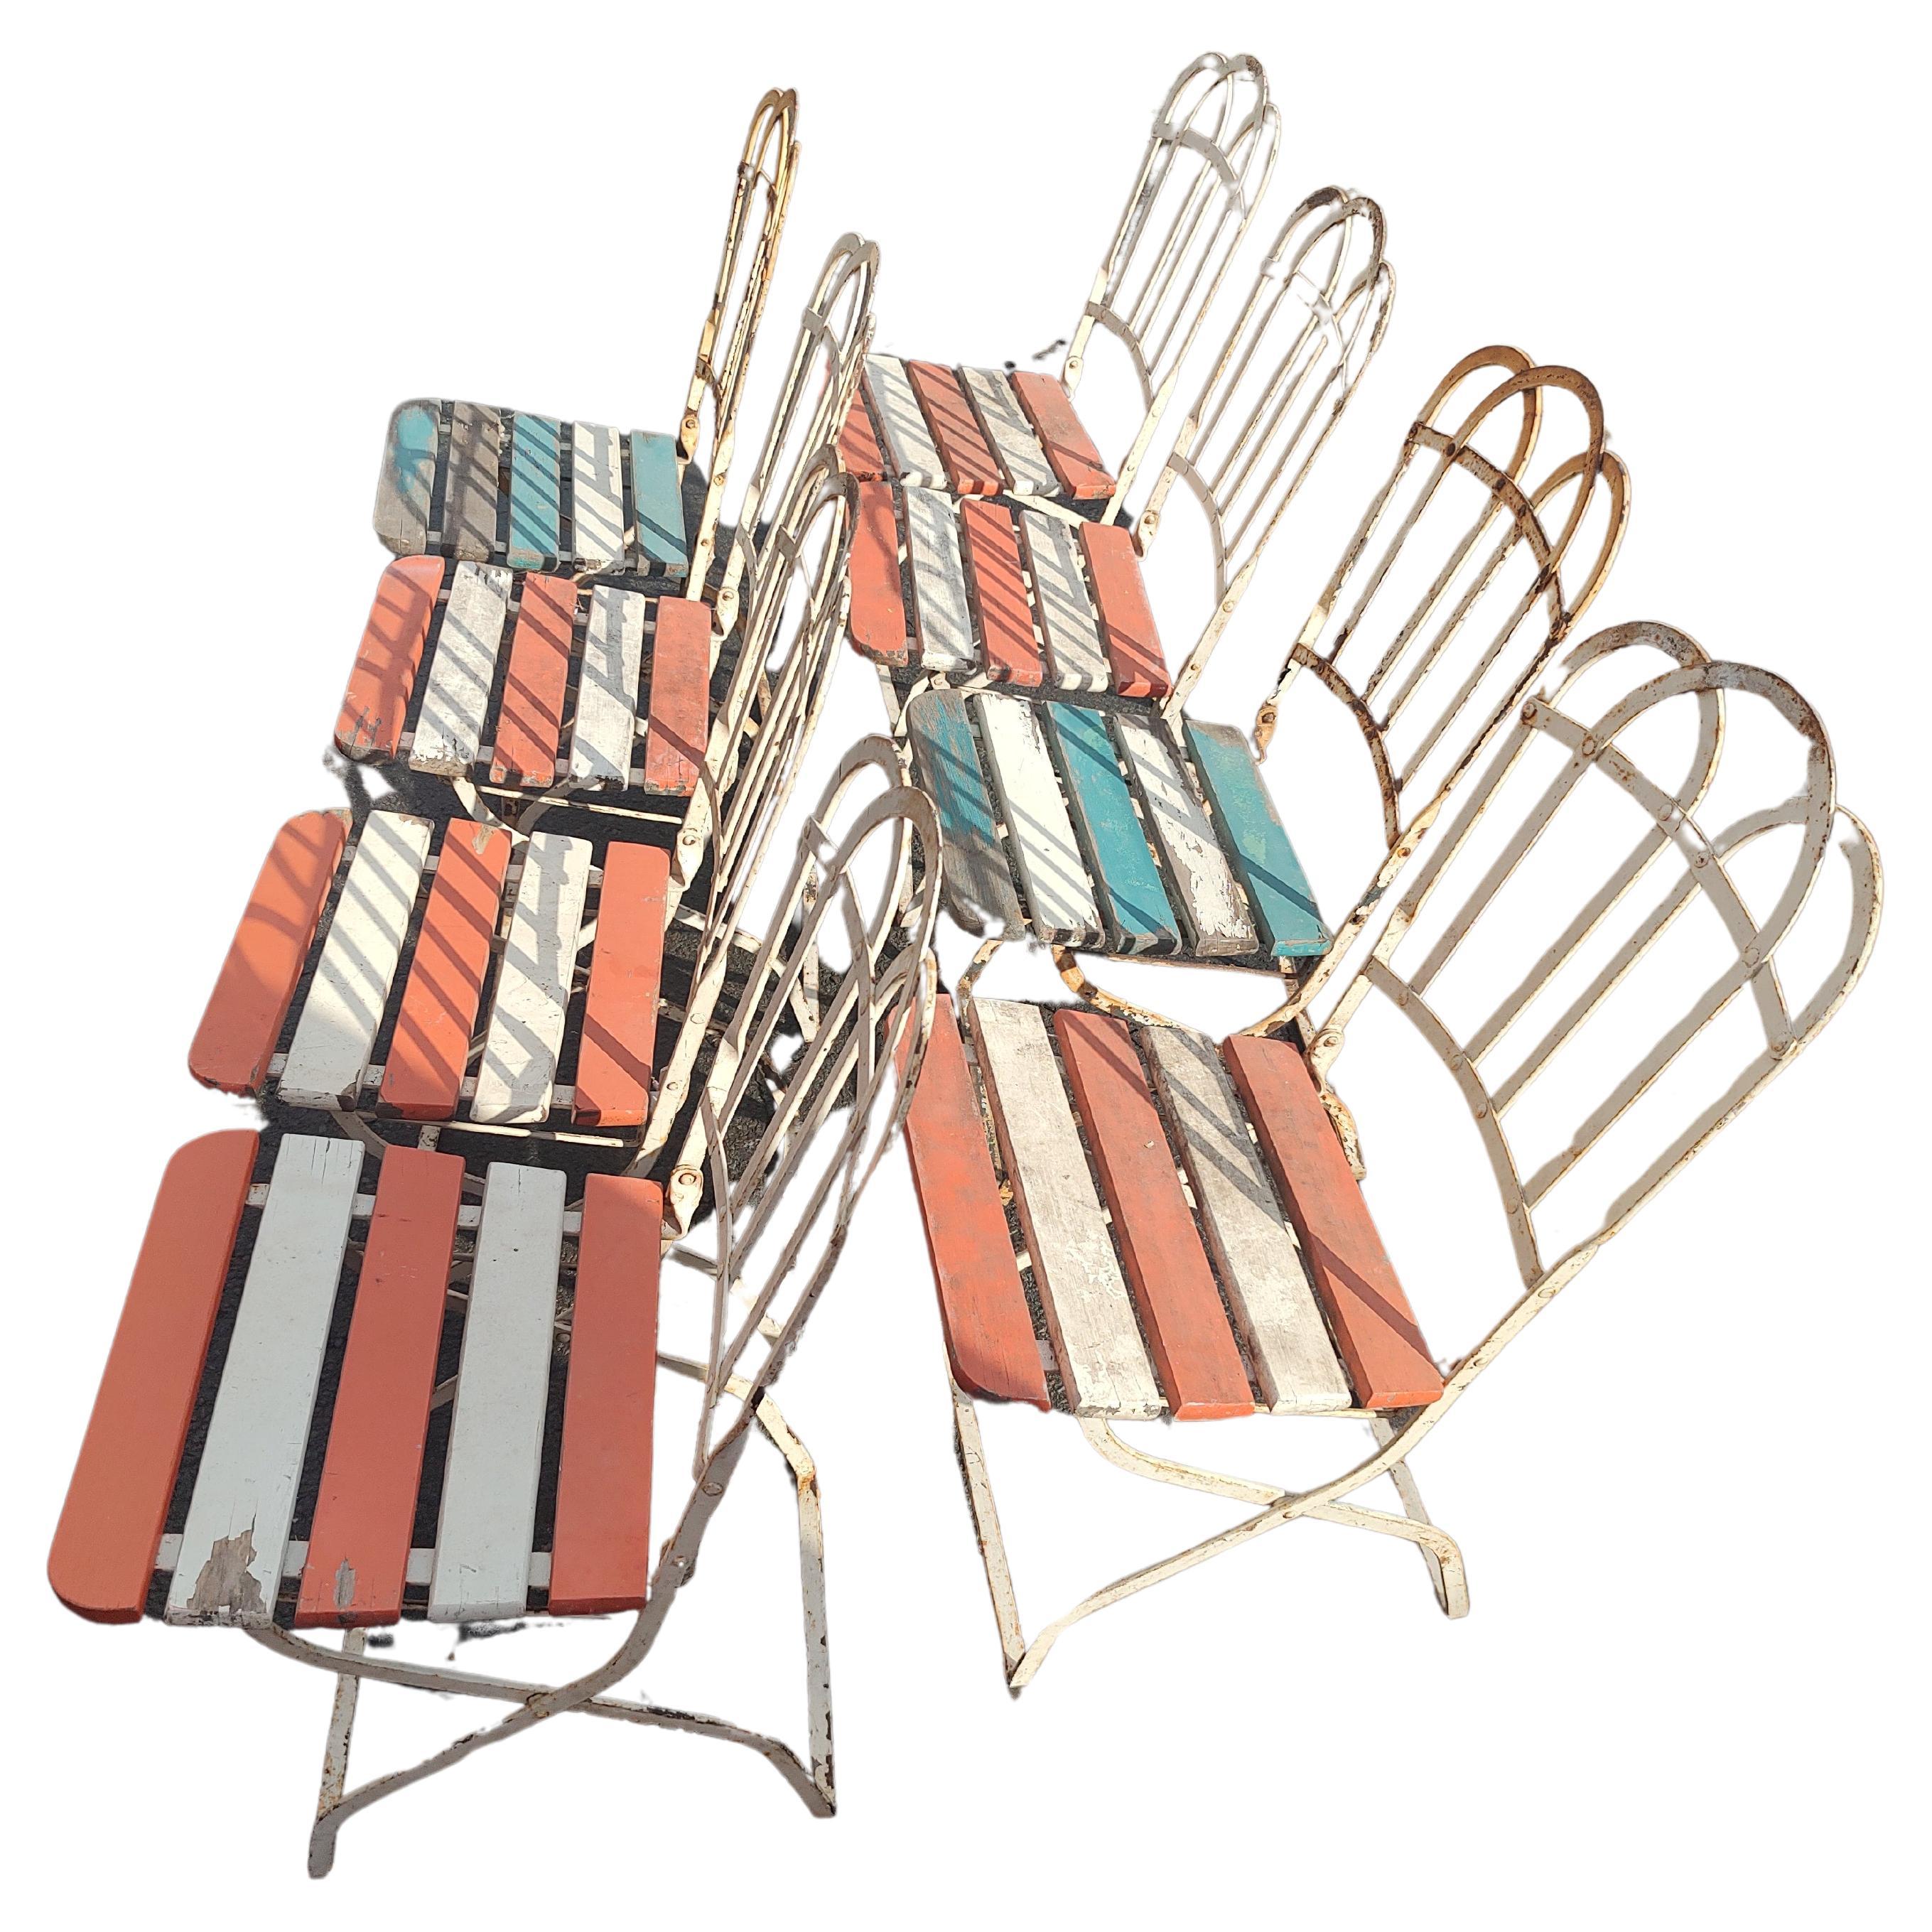 Set of 8 French Fold-up Iron with Slatted Wood Cafe Garden Dining Chairs C1920 In Good Condition For Sale In Port Jervis, NY